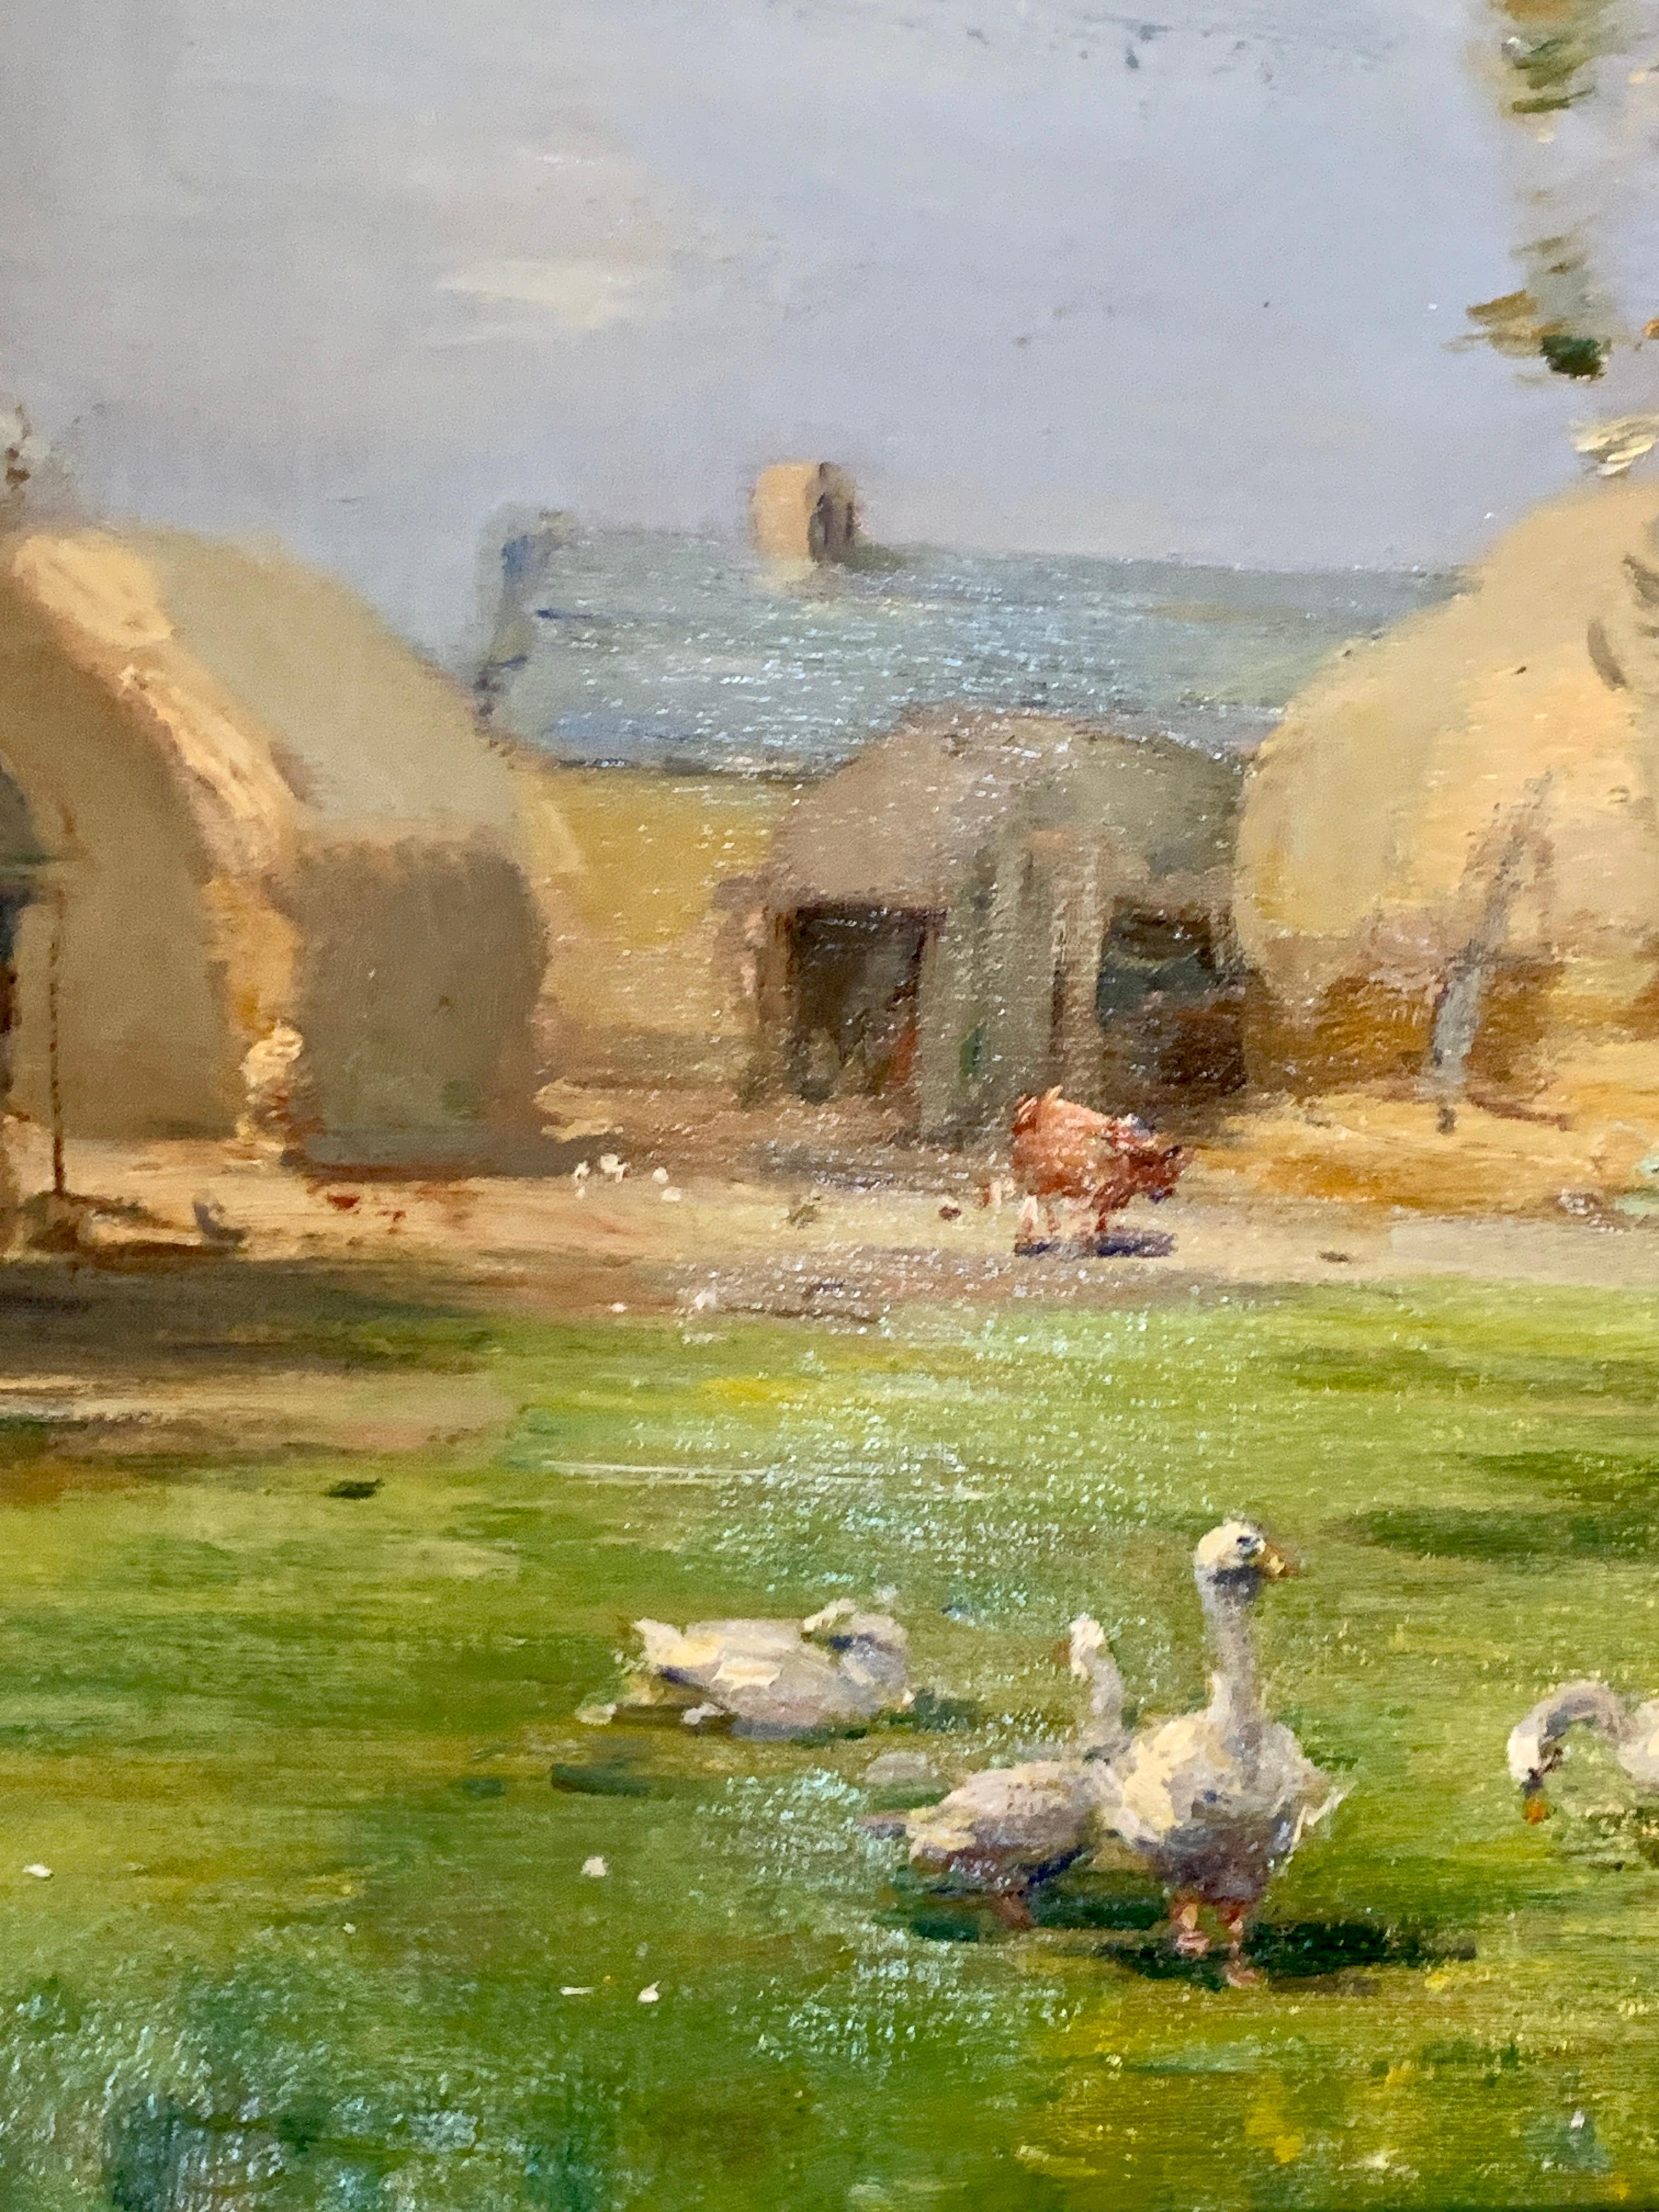 Scottish Impressionist landscape with Geese in a farmyard with trees, hay bales  - Painting by William Miller Frazer